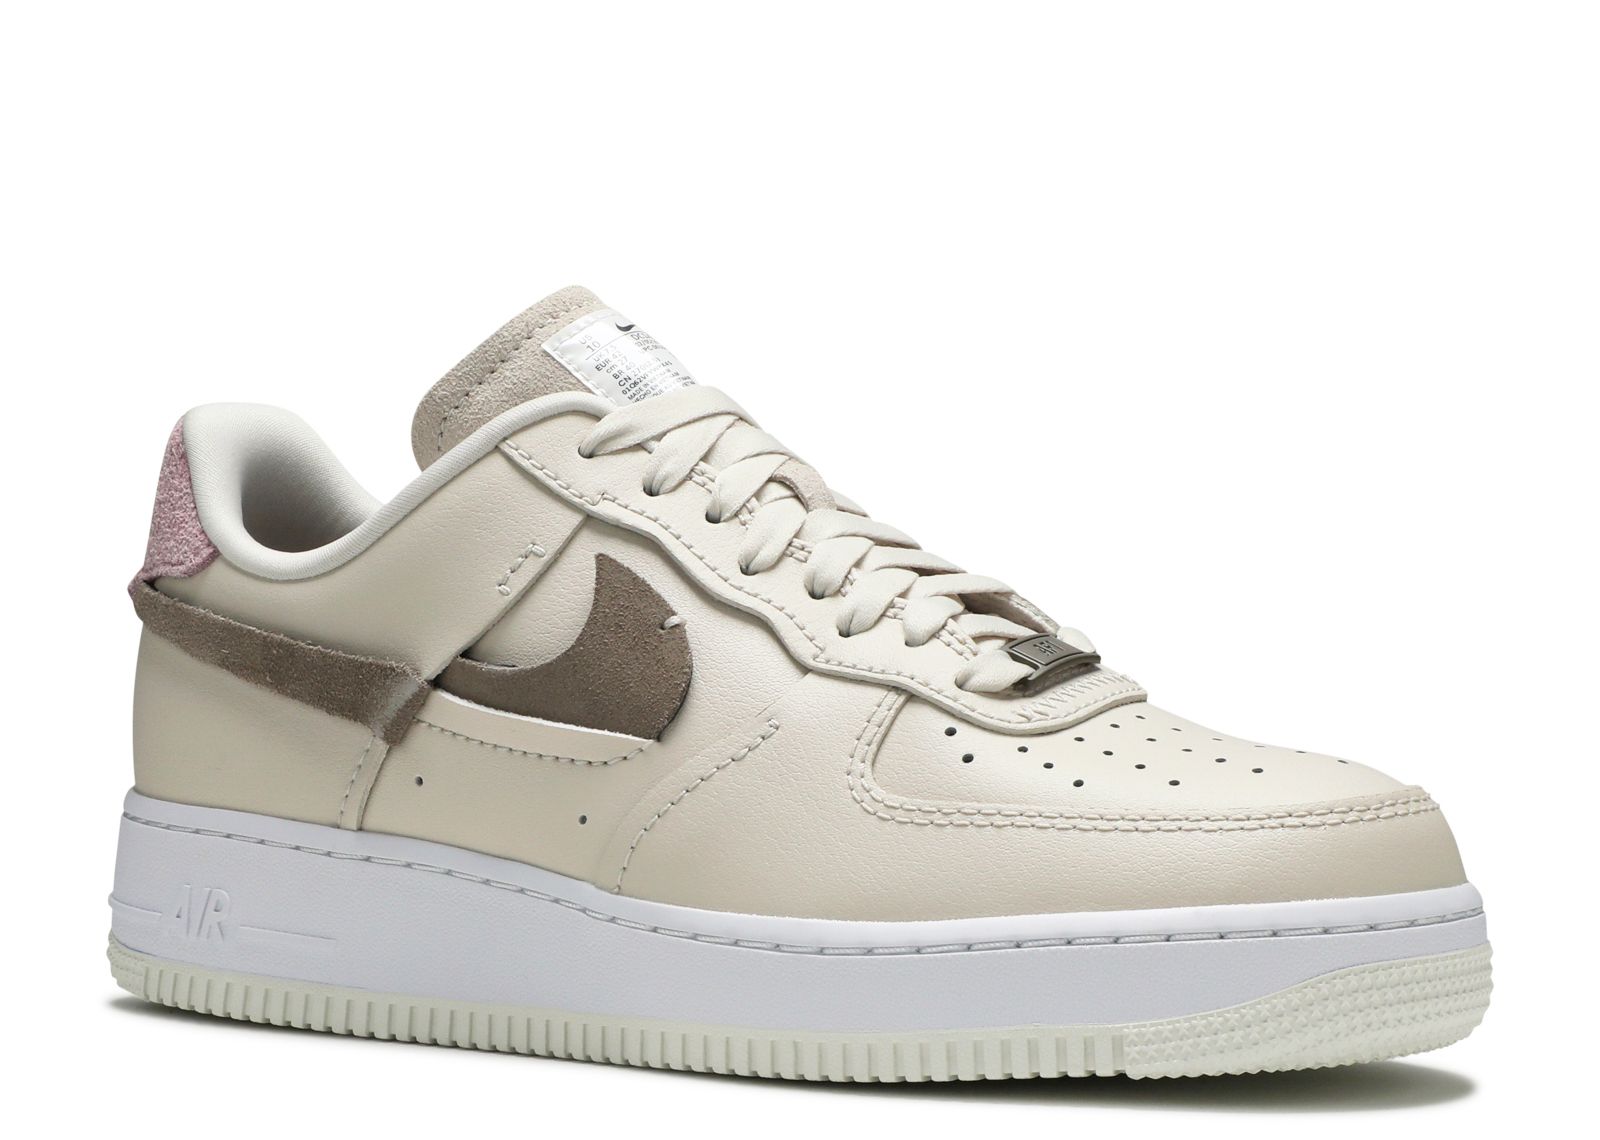 Wmns Air Force 1 Low Vandalized 'Light Orewood Brown'